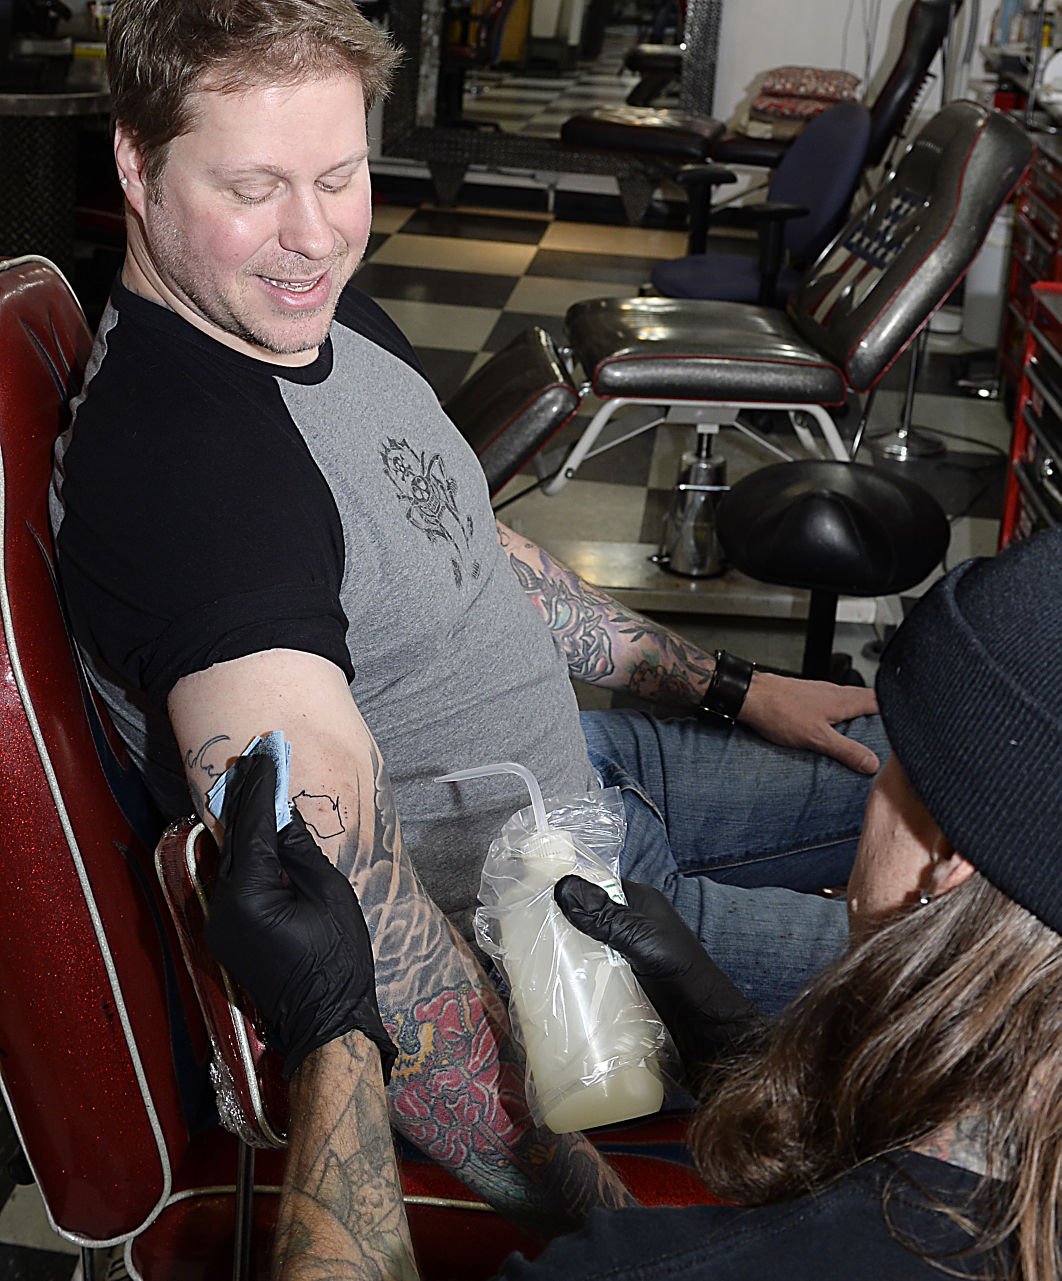 Downtown Tattoo shops marathon event will benefit Lyme disease research